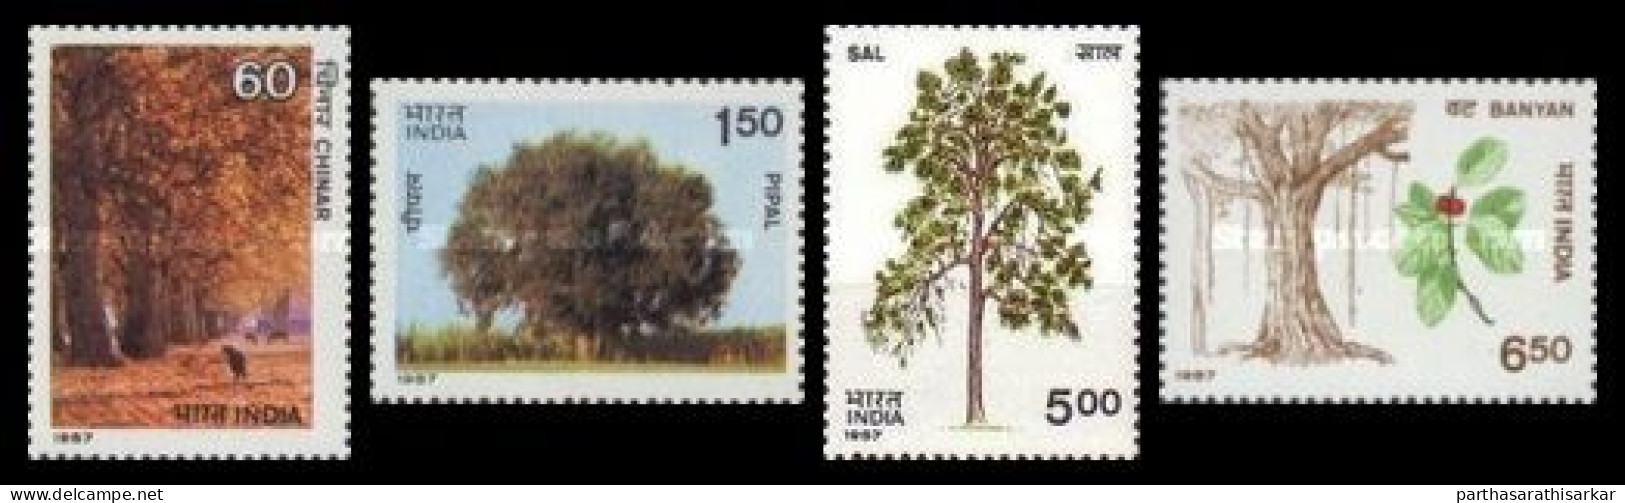 INDIA 1987 INDIAN TREES NATURE COMPLETE SET MNH - Ungebraucht